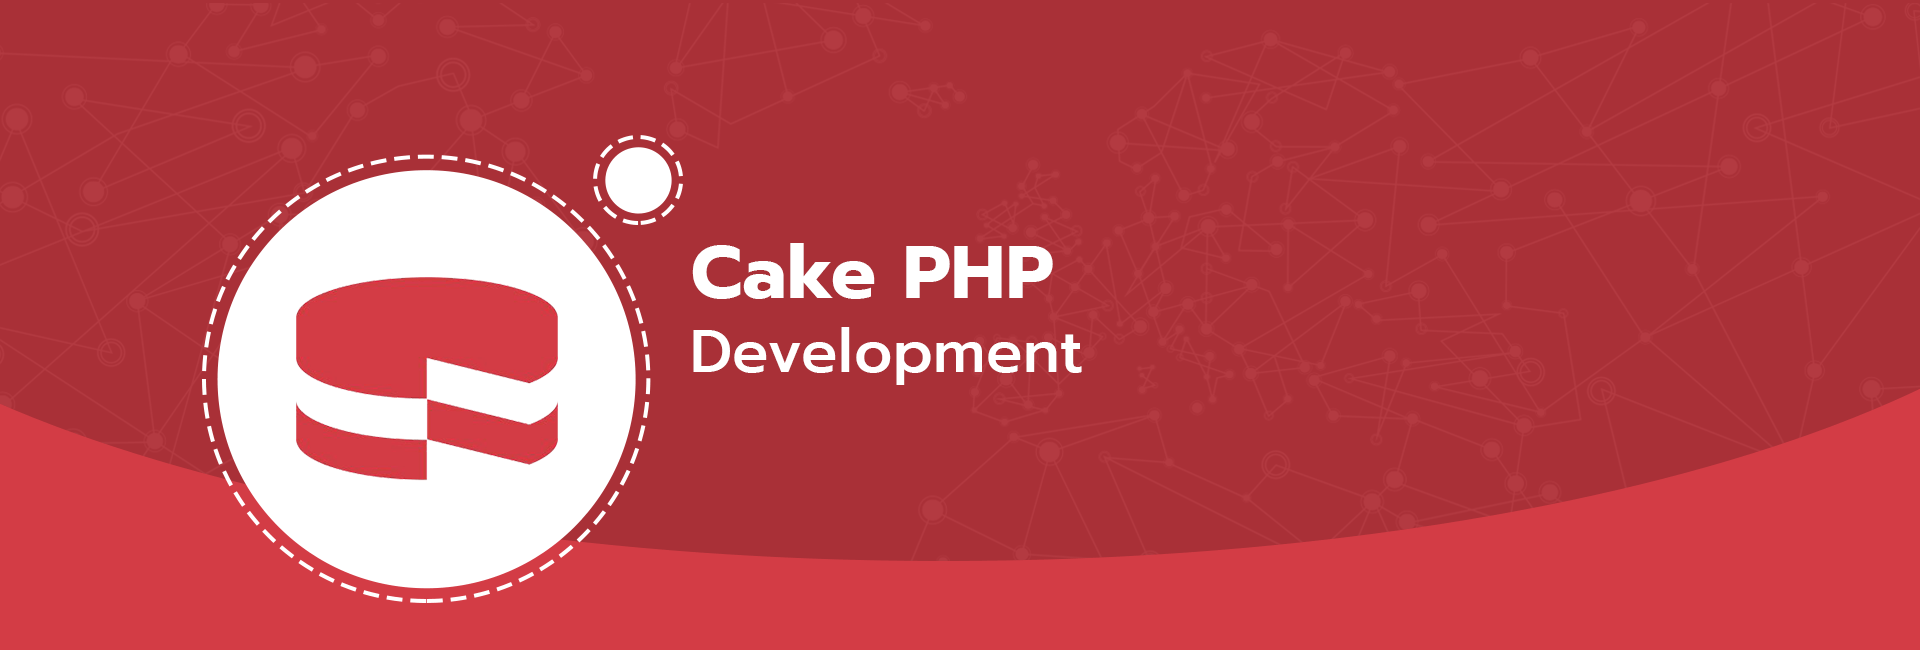 cake_php.png